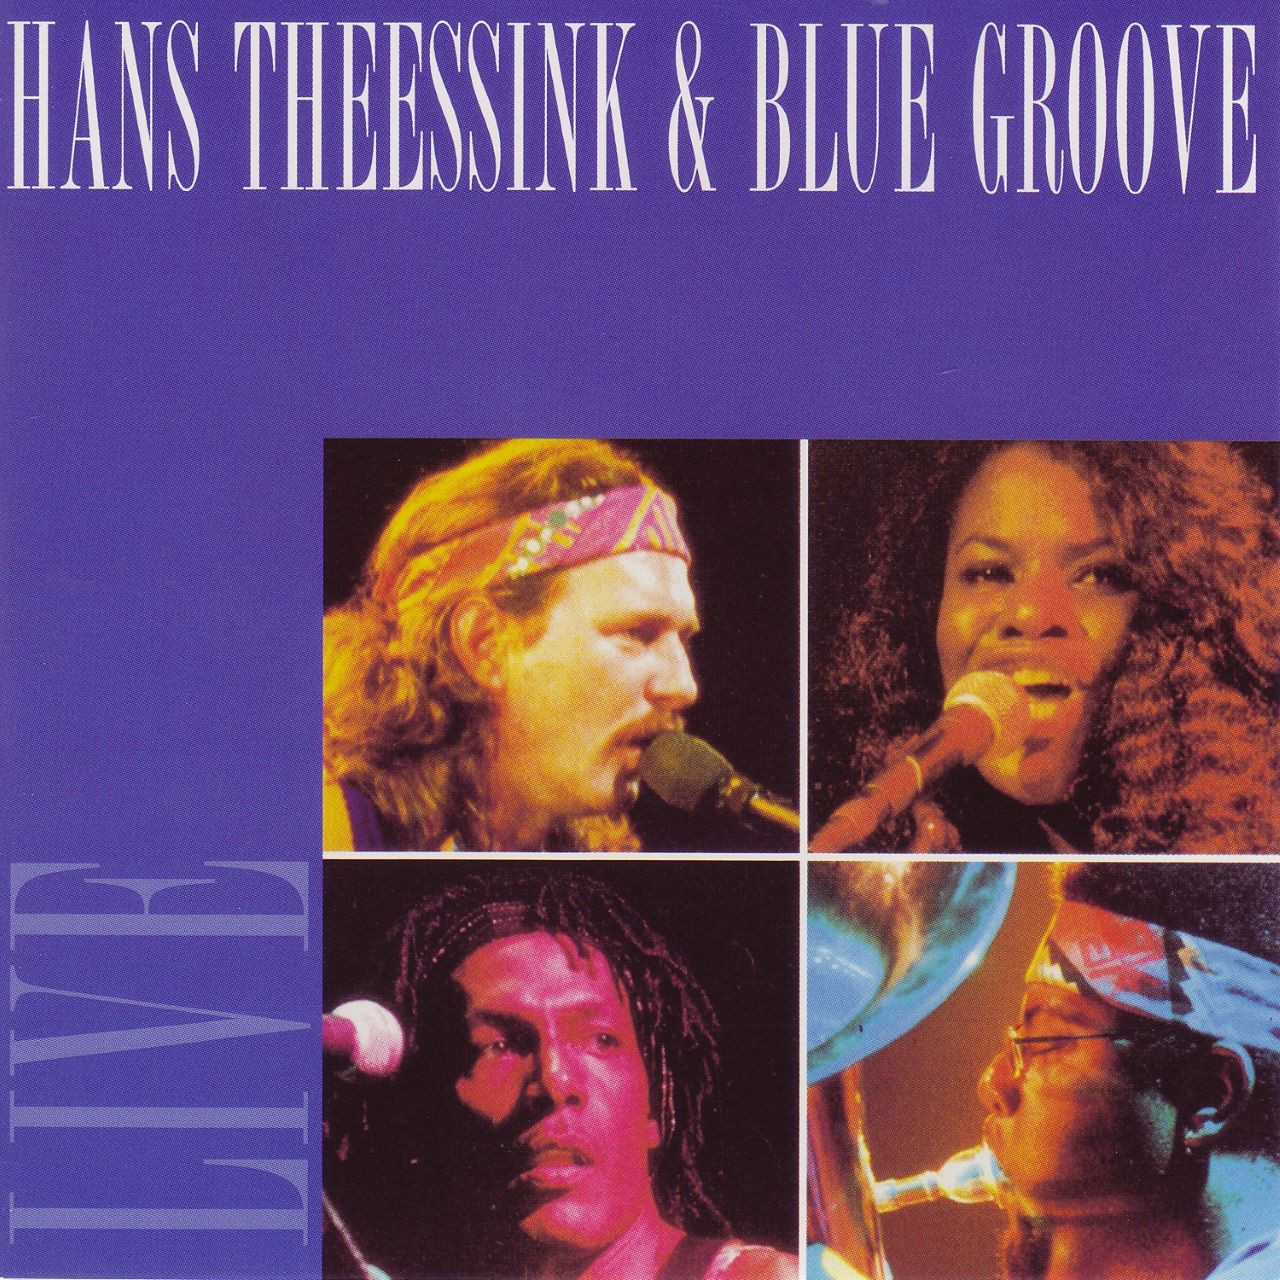 Hans Theessink & Blue Groove – Live cover album